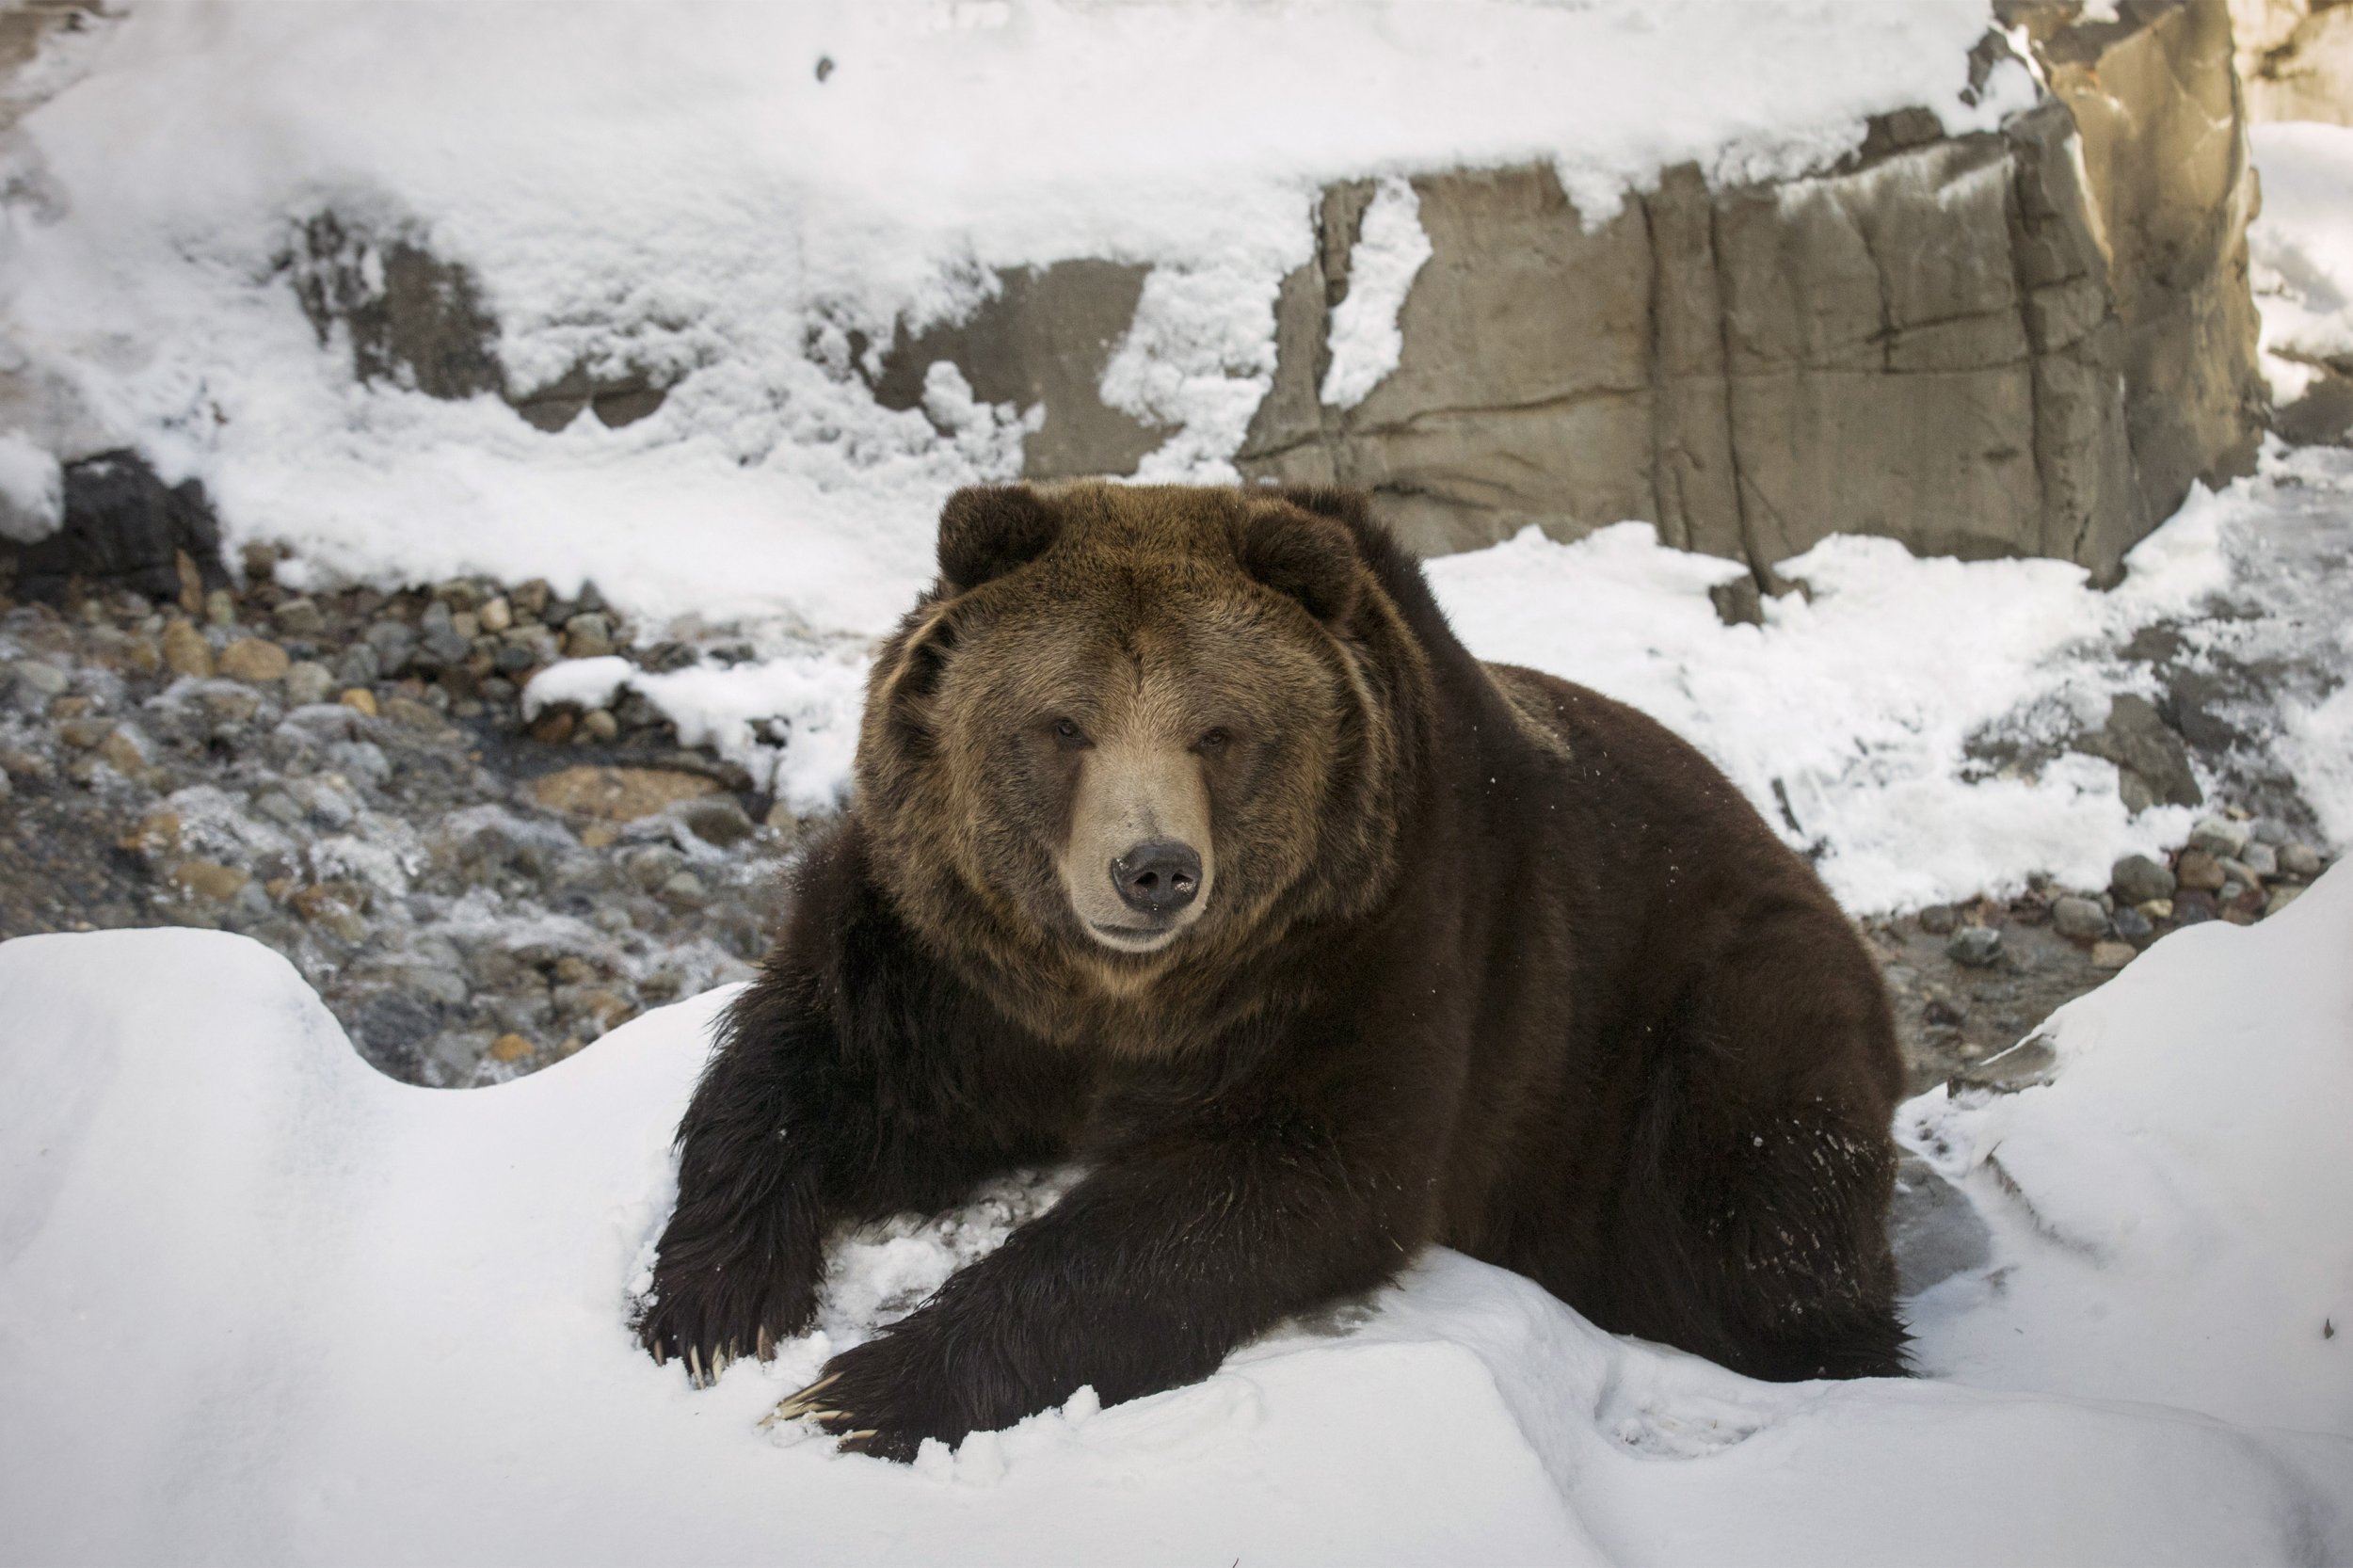 How much do grizzly bears eat in a day?